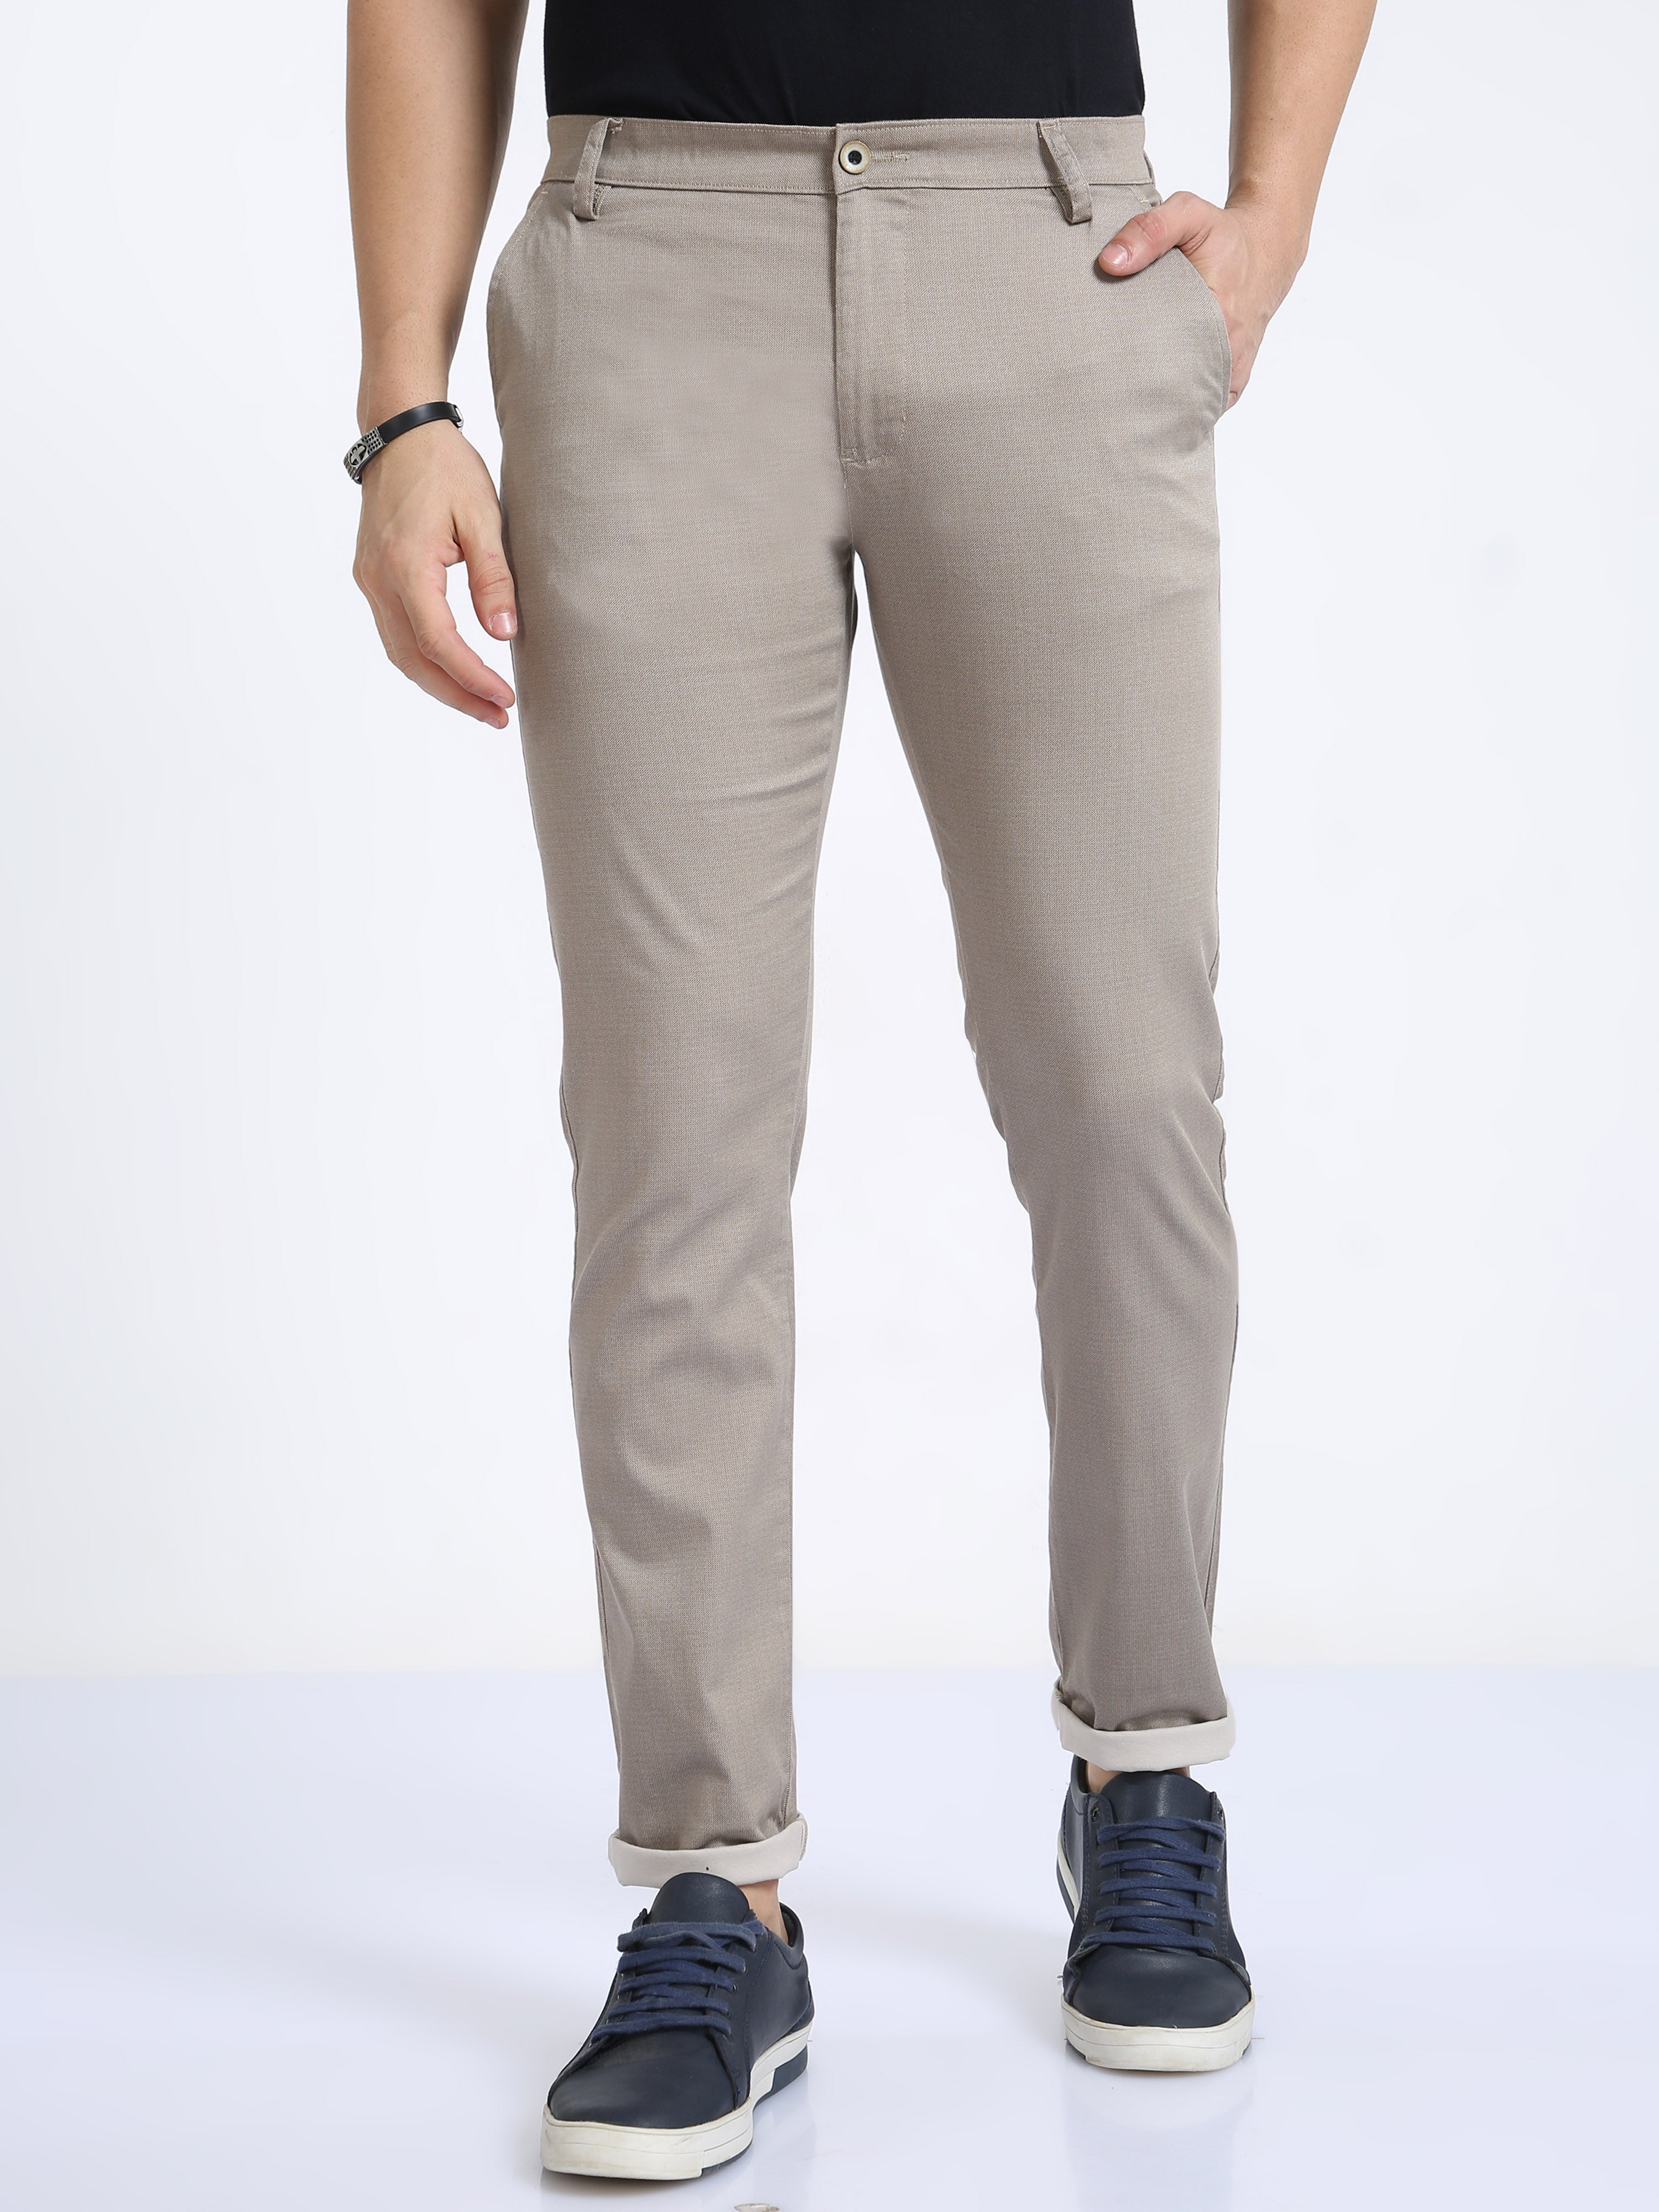 Classic Polo Mens Moderate Fit Solid Grey Color Trousers | To2-21 F-Gry-Mf-Ly